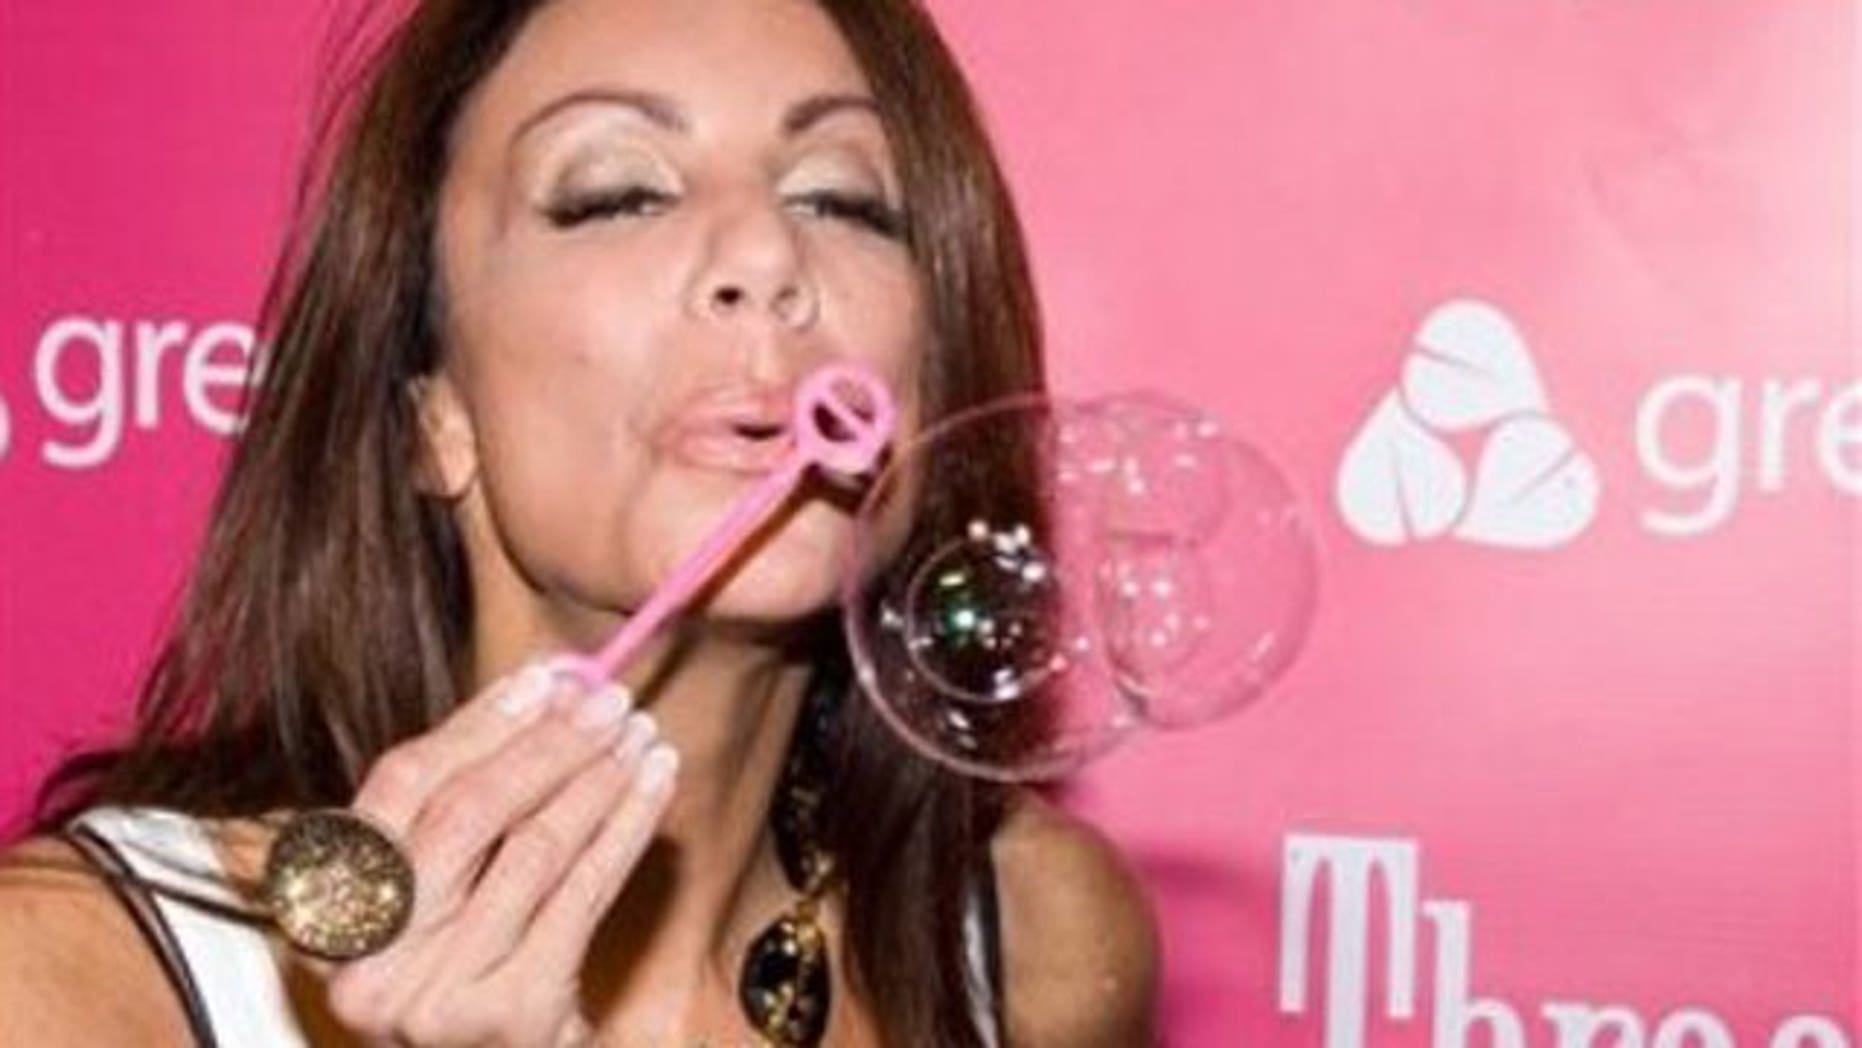 Real Housewife Danielle Staub In Sex Tape Distributor Says Fox News 